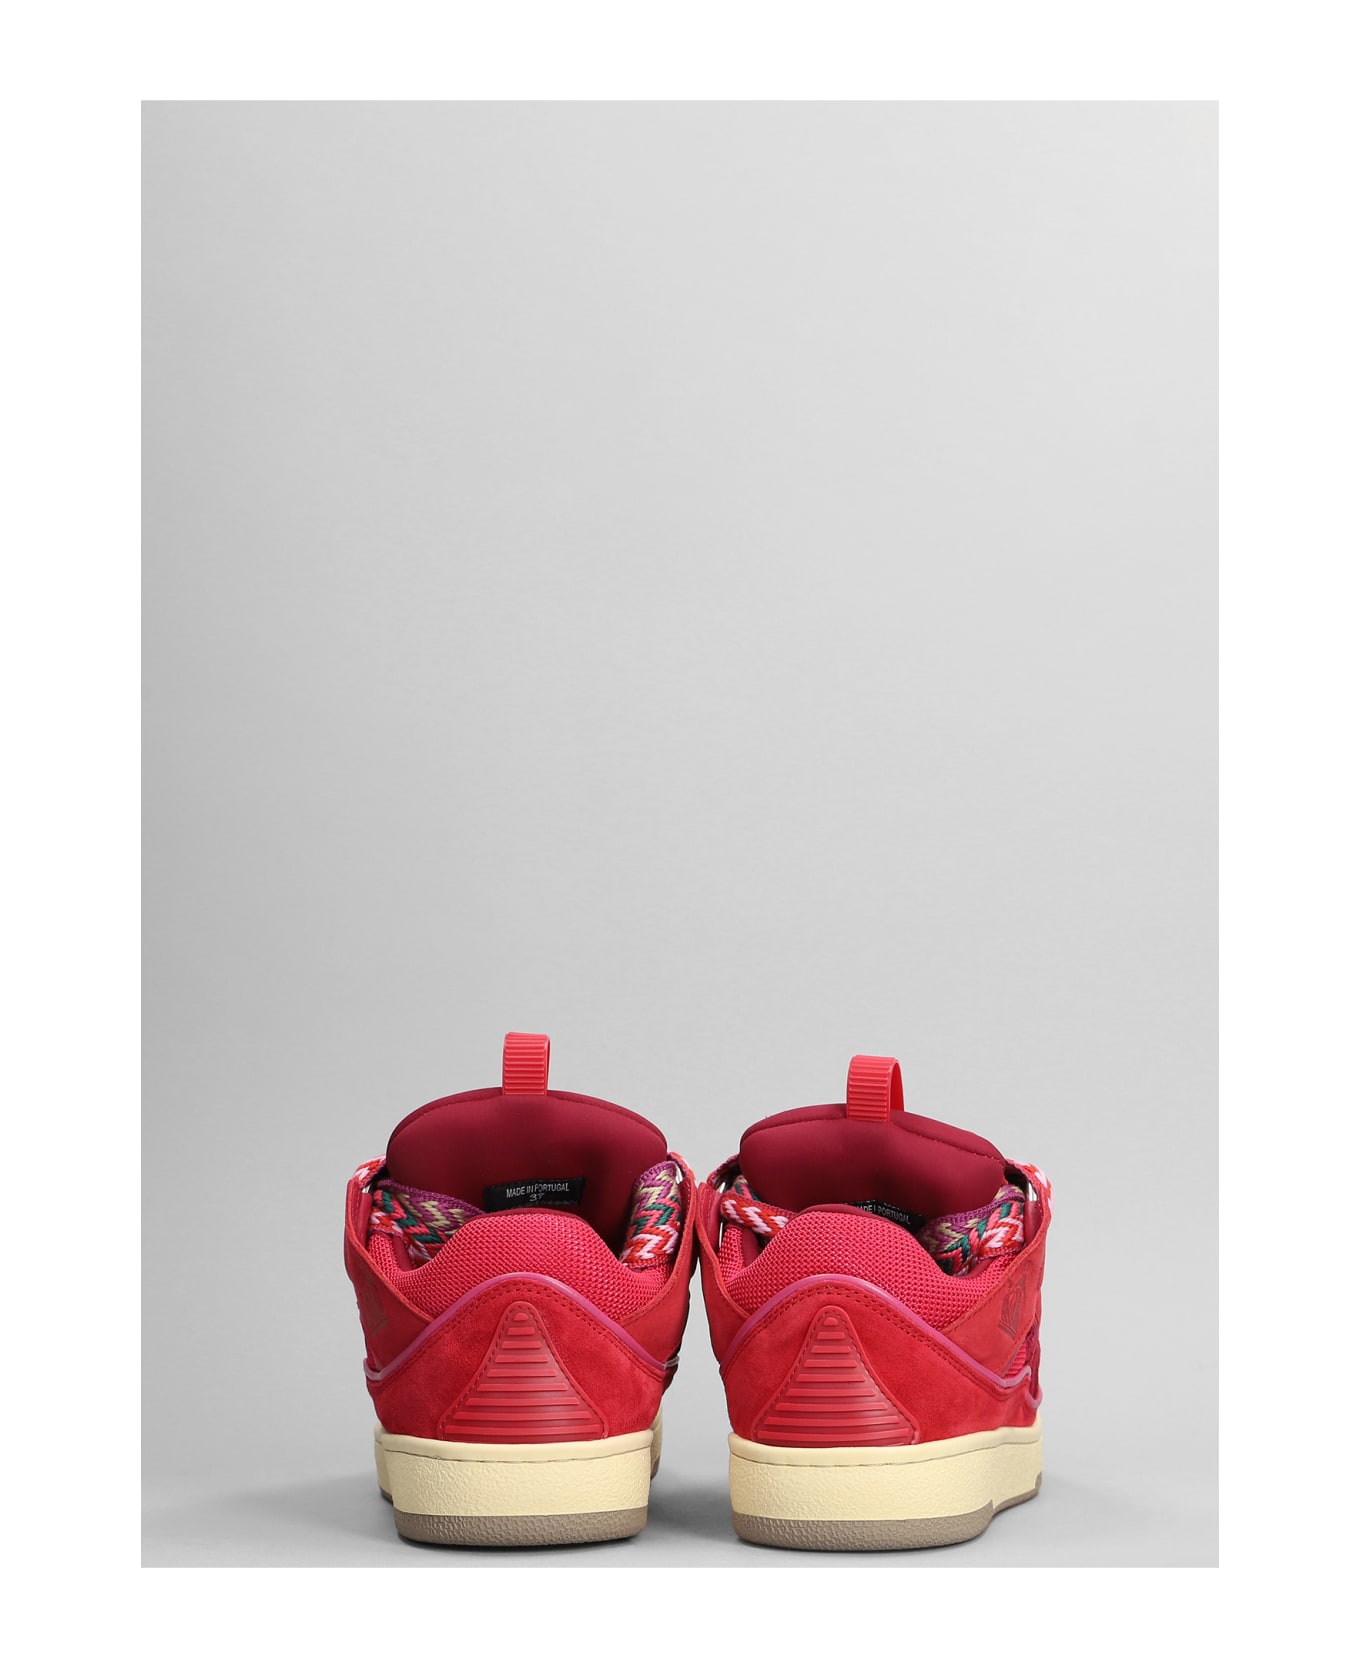 Lanvin Curb Sneakers In Fuxia Suede And Leather - fuxia スニーカー